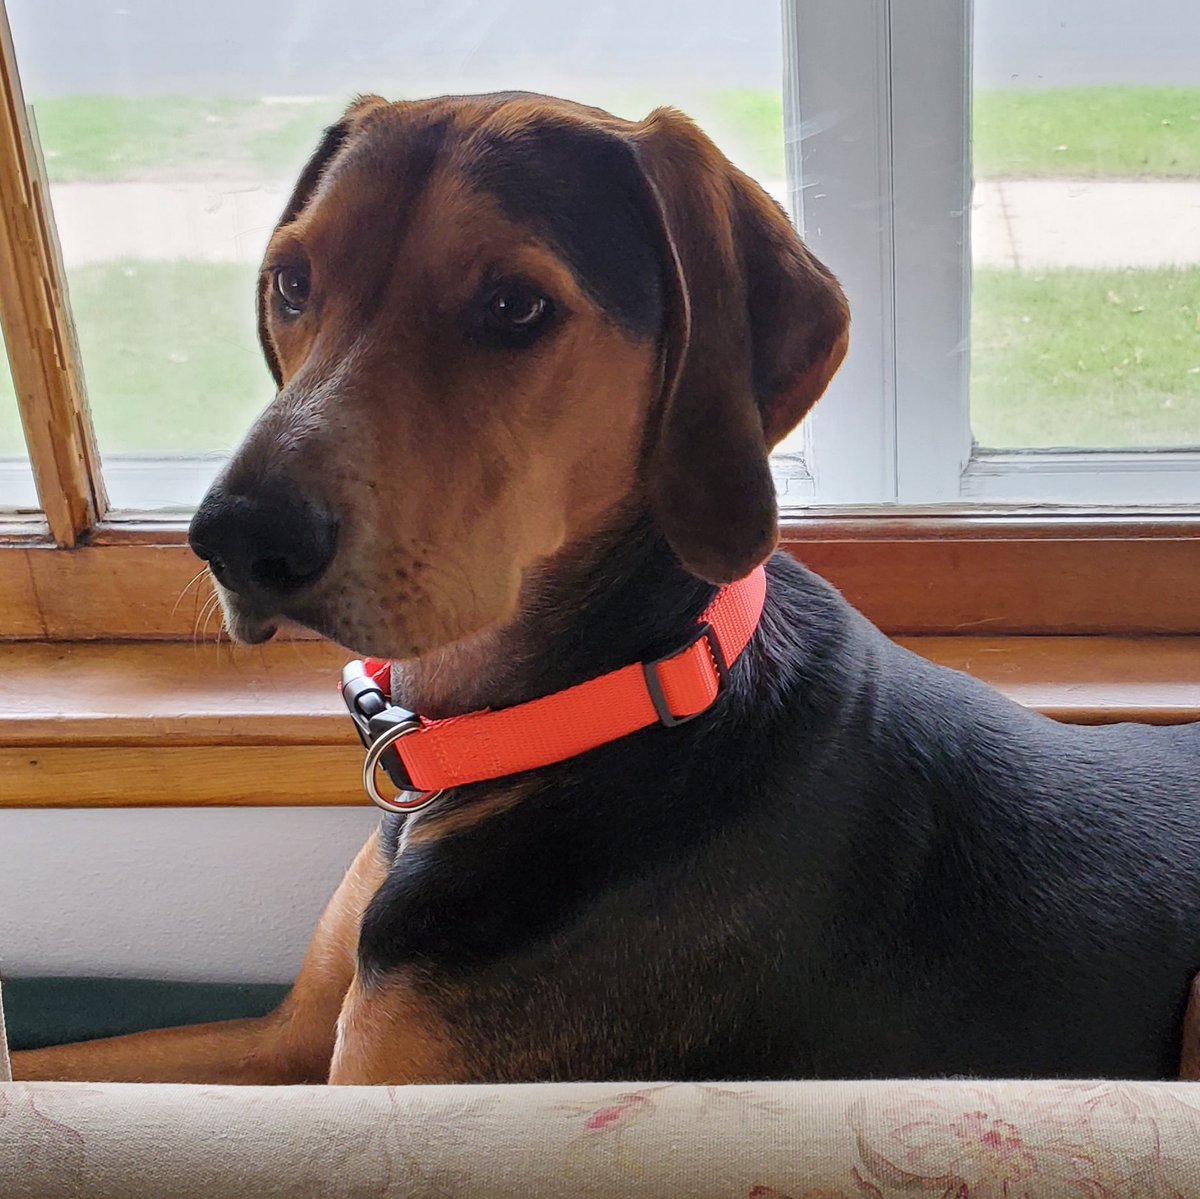 He is Larry with the Orange Collar this week for National #WorkZoneAwarenessWeek but especially for #GoOrangeDay on the 28th! 

Folks (and pets) can show their support for Work Zone Safety tomorrow by wearing orange and sharing on social using #Orange4Safety and #NWZAW 🧡🦺🐕